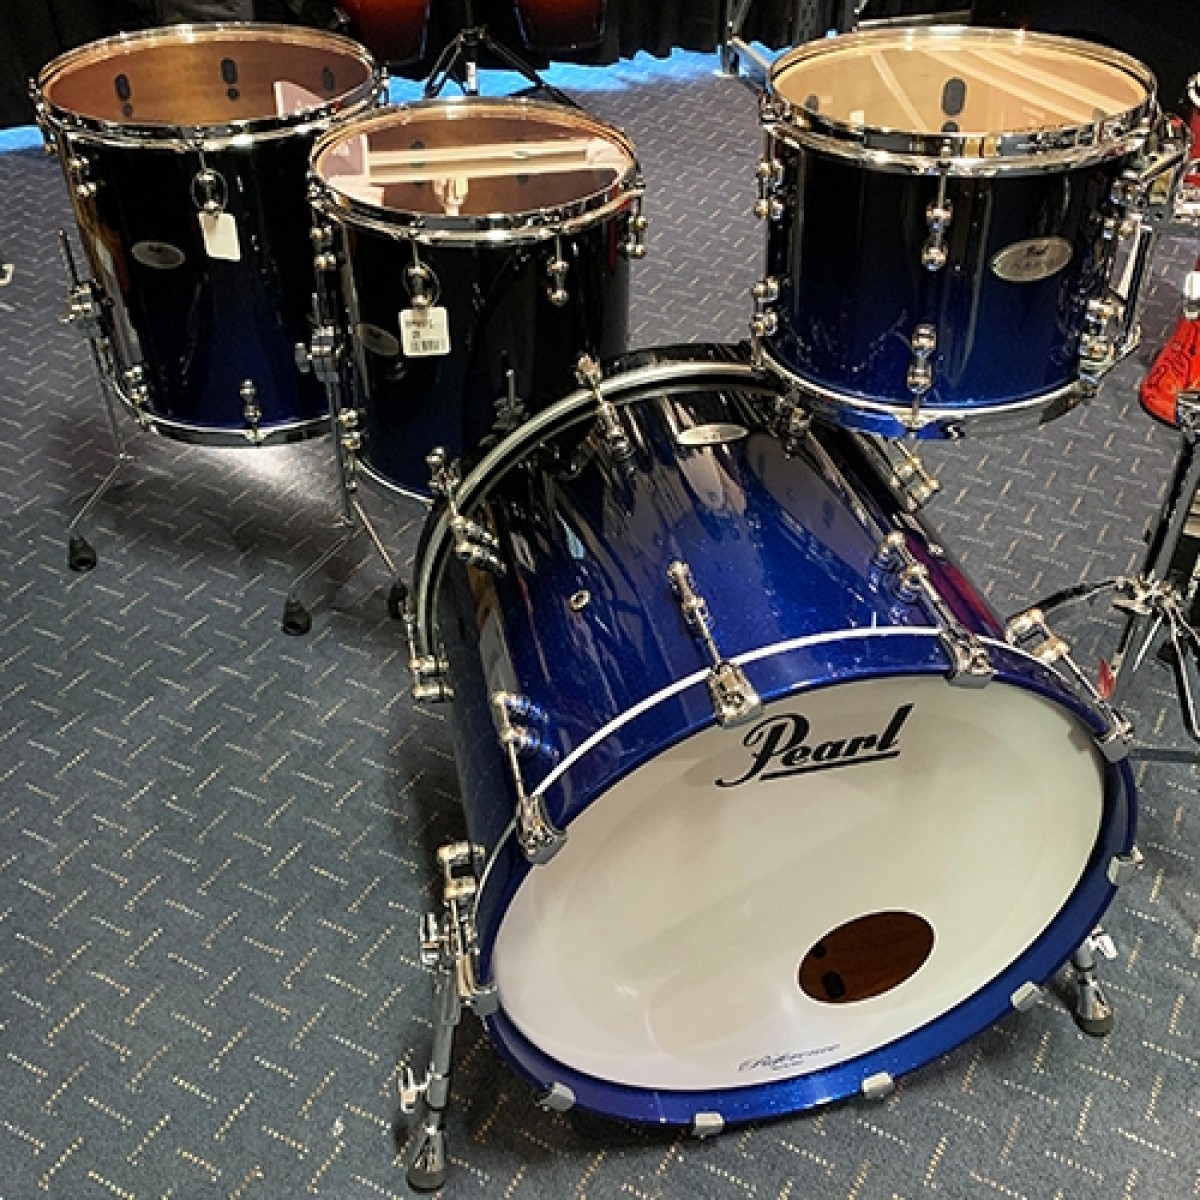 REFERENCE PURE  Pearl Drums -Official site